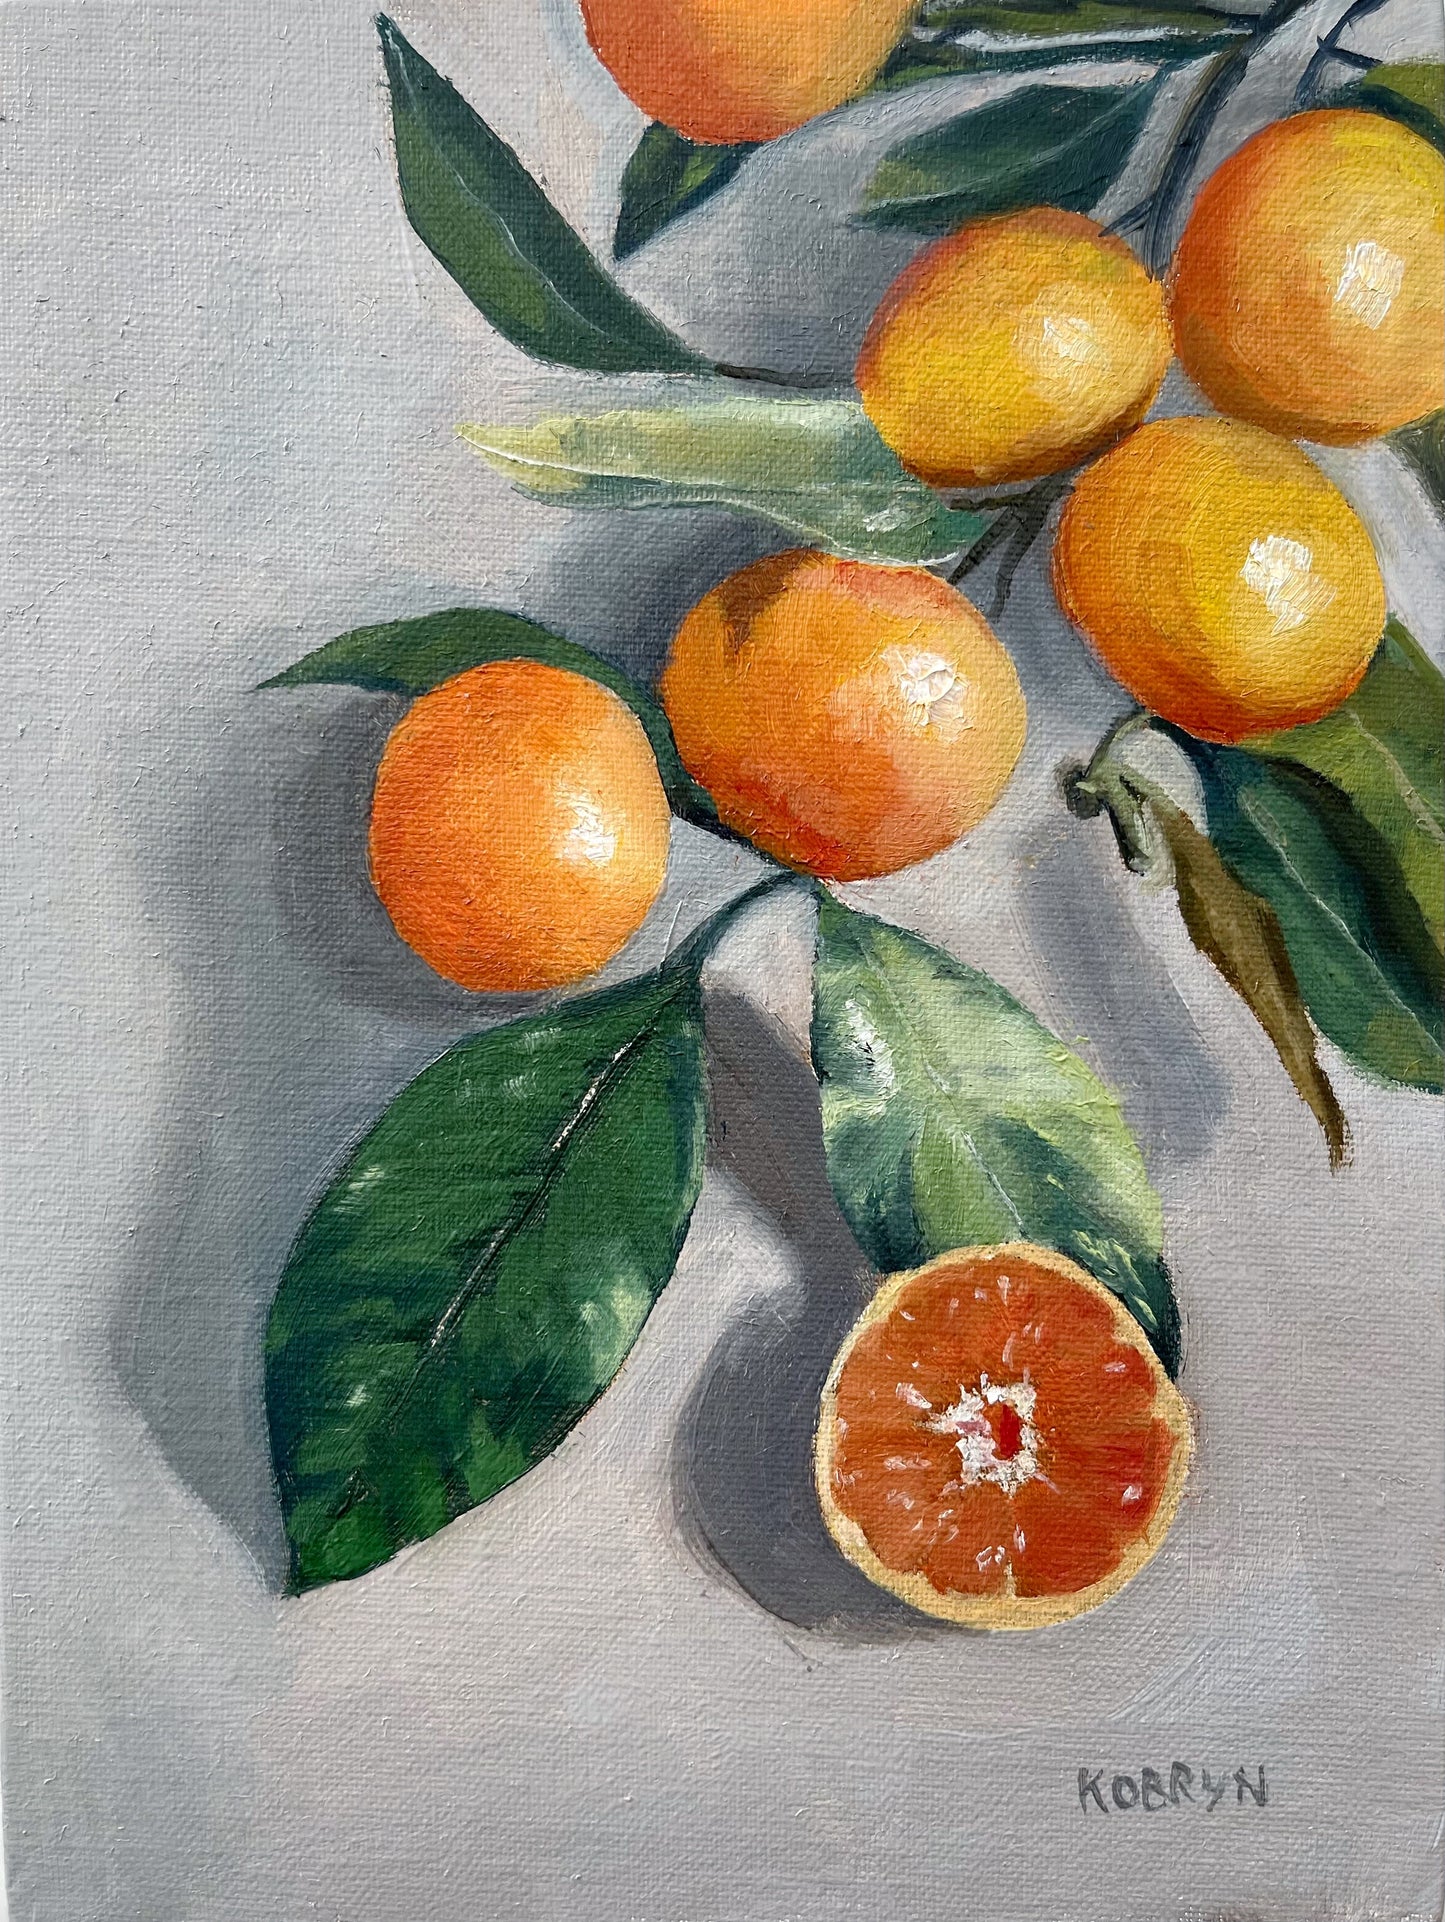 “Clementine Branch” - 6x8” oil on linen panel